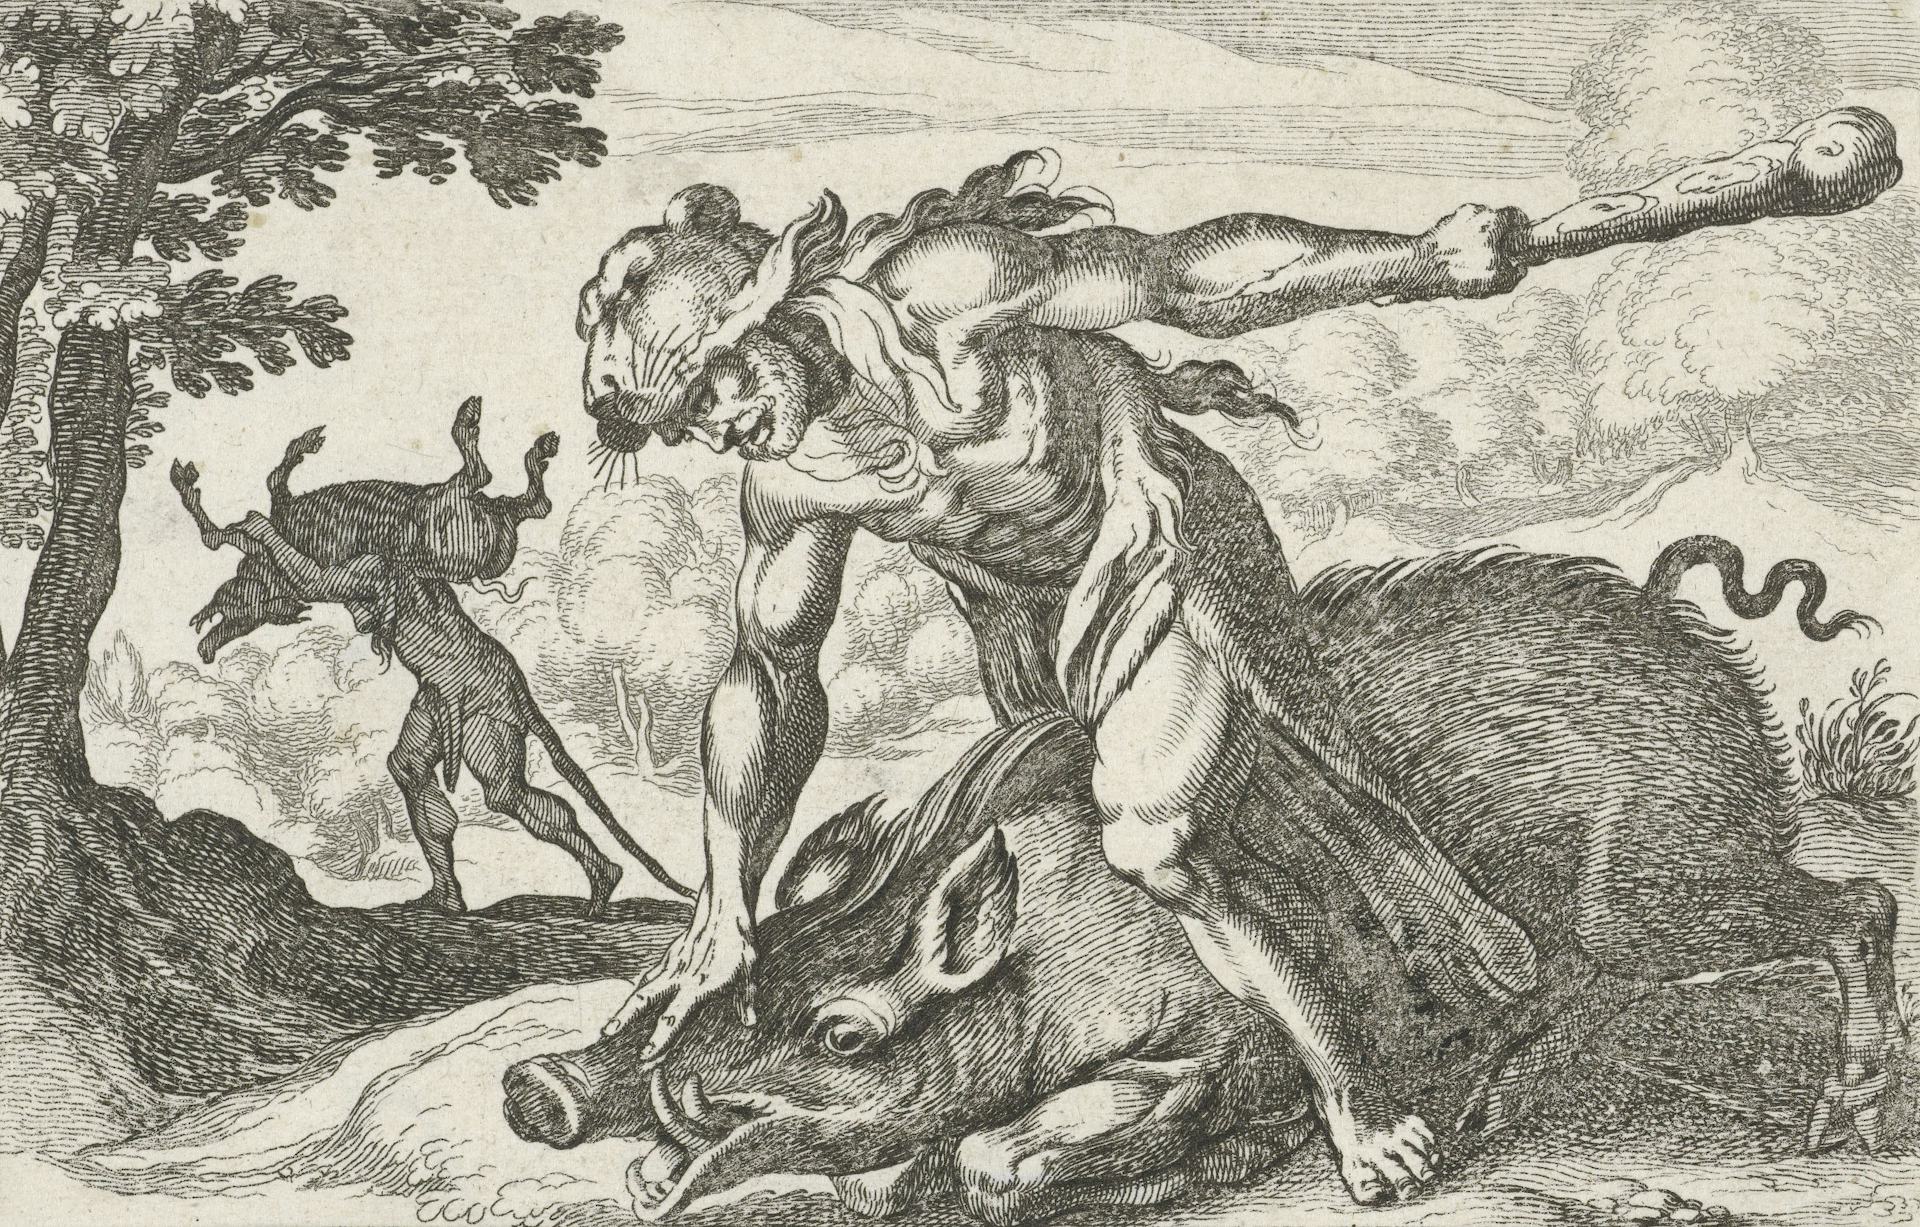 Hercules catching the boar of Erymanthus by Simon Frisius, after Antonio Tempesta (ca. 1610–64)